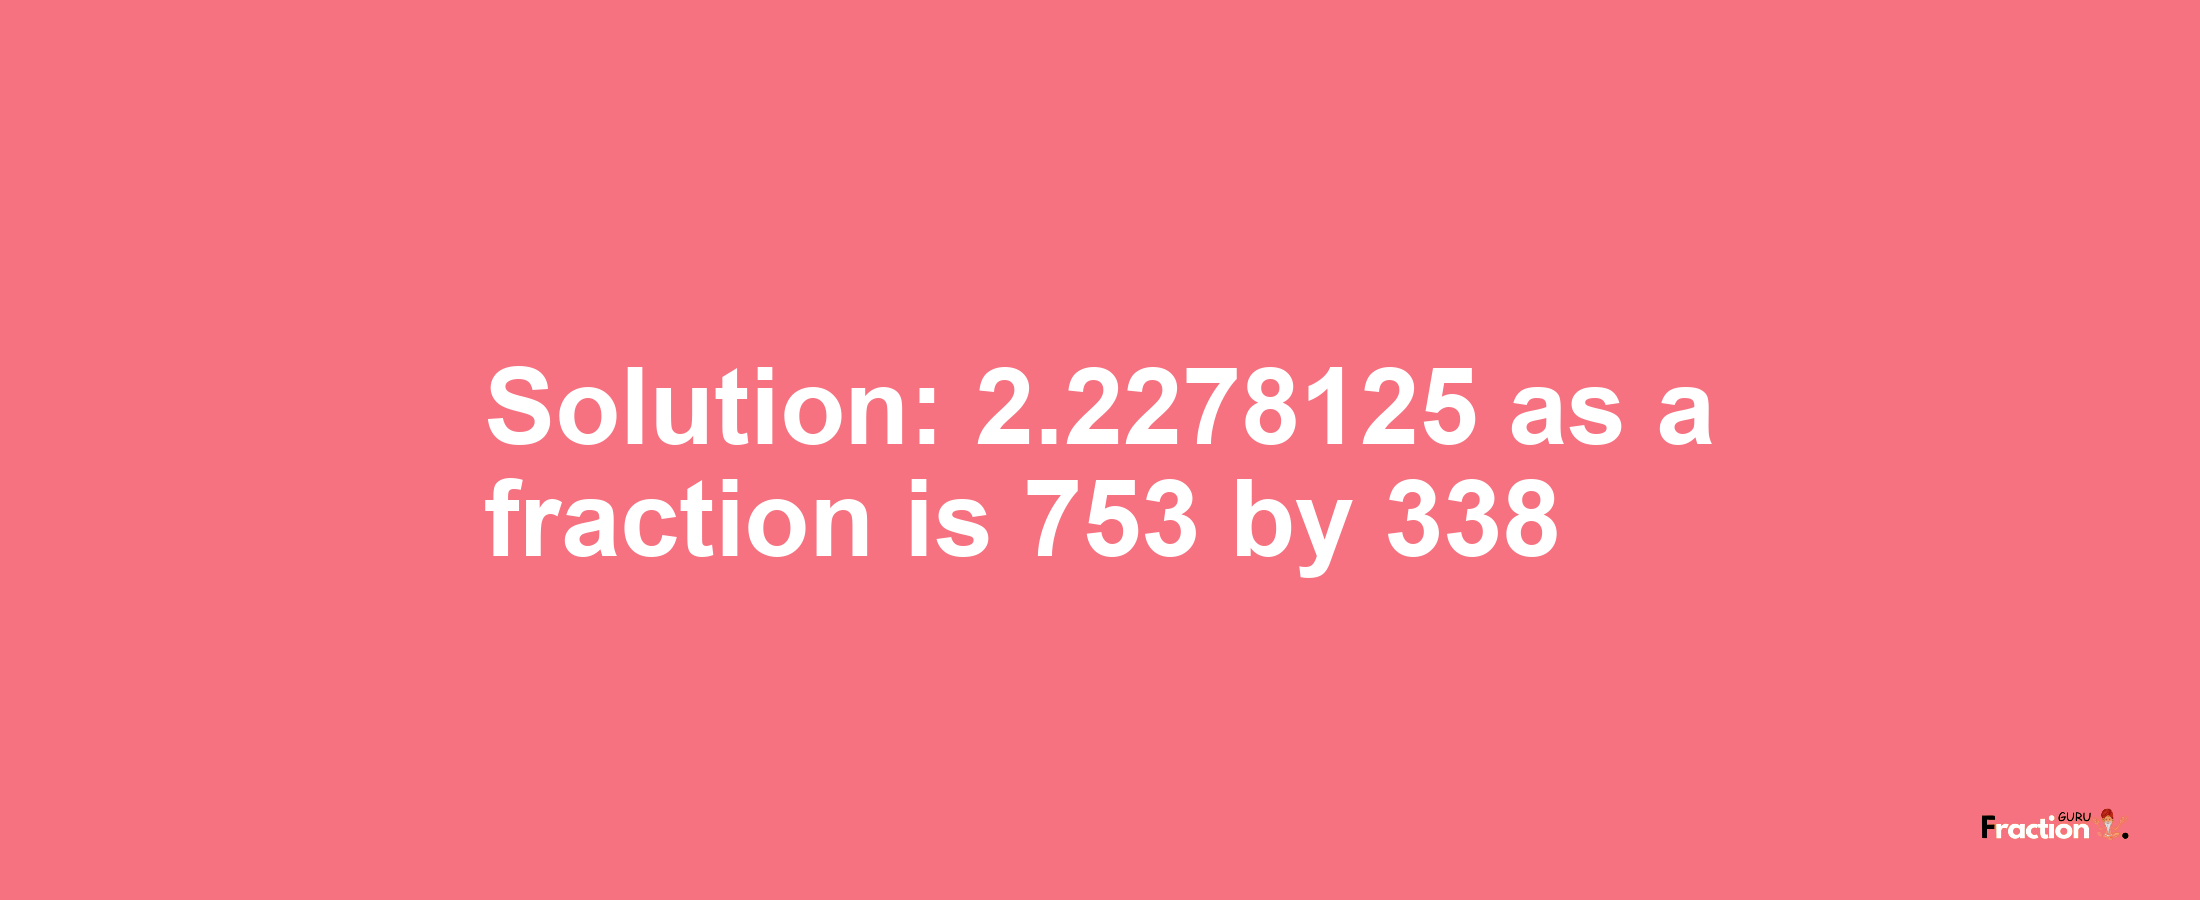 Solution:2.2278125 as a fraction is 753/338